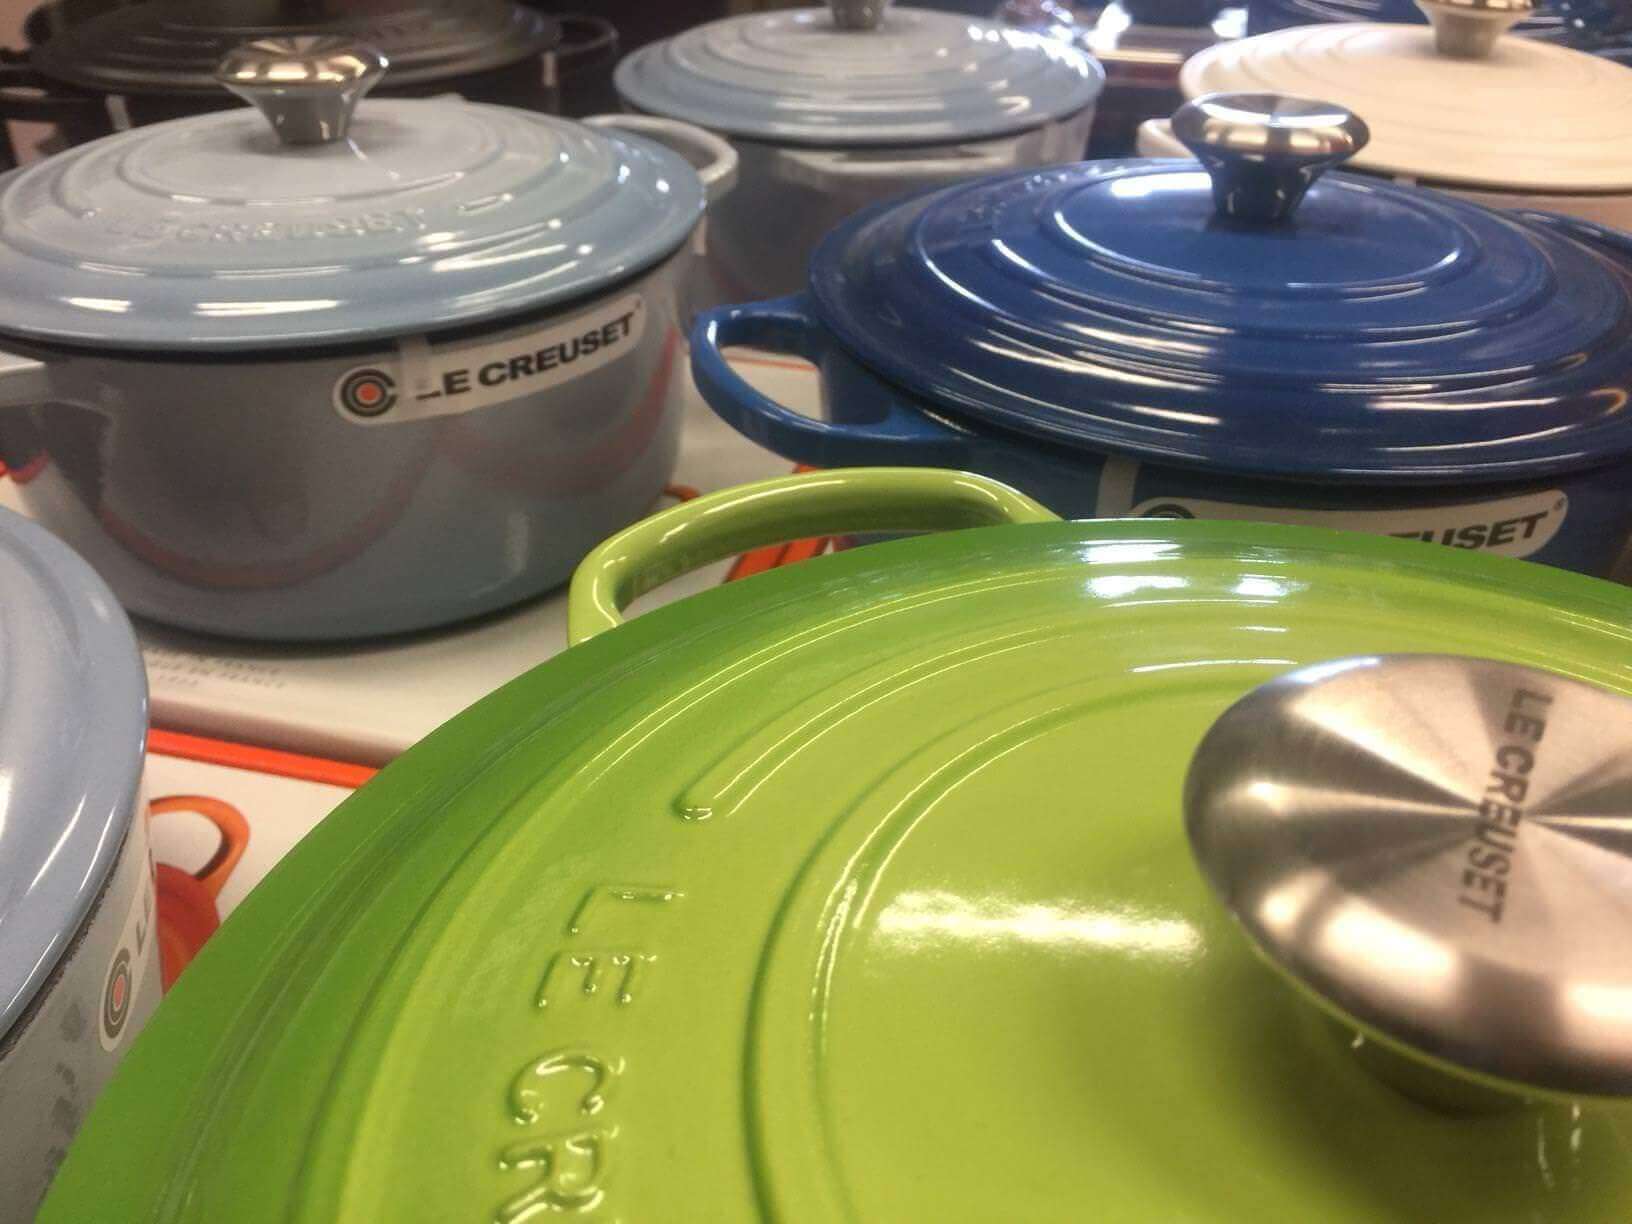 https://www.booniehicks.com/wp-content/uploads/2018/05/Why-is-Le-Creuset-so-expensive.jpg